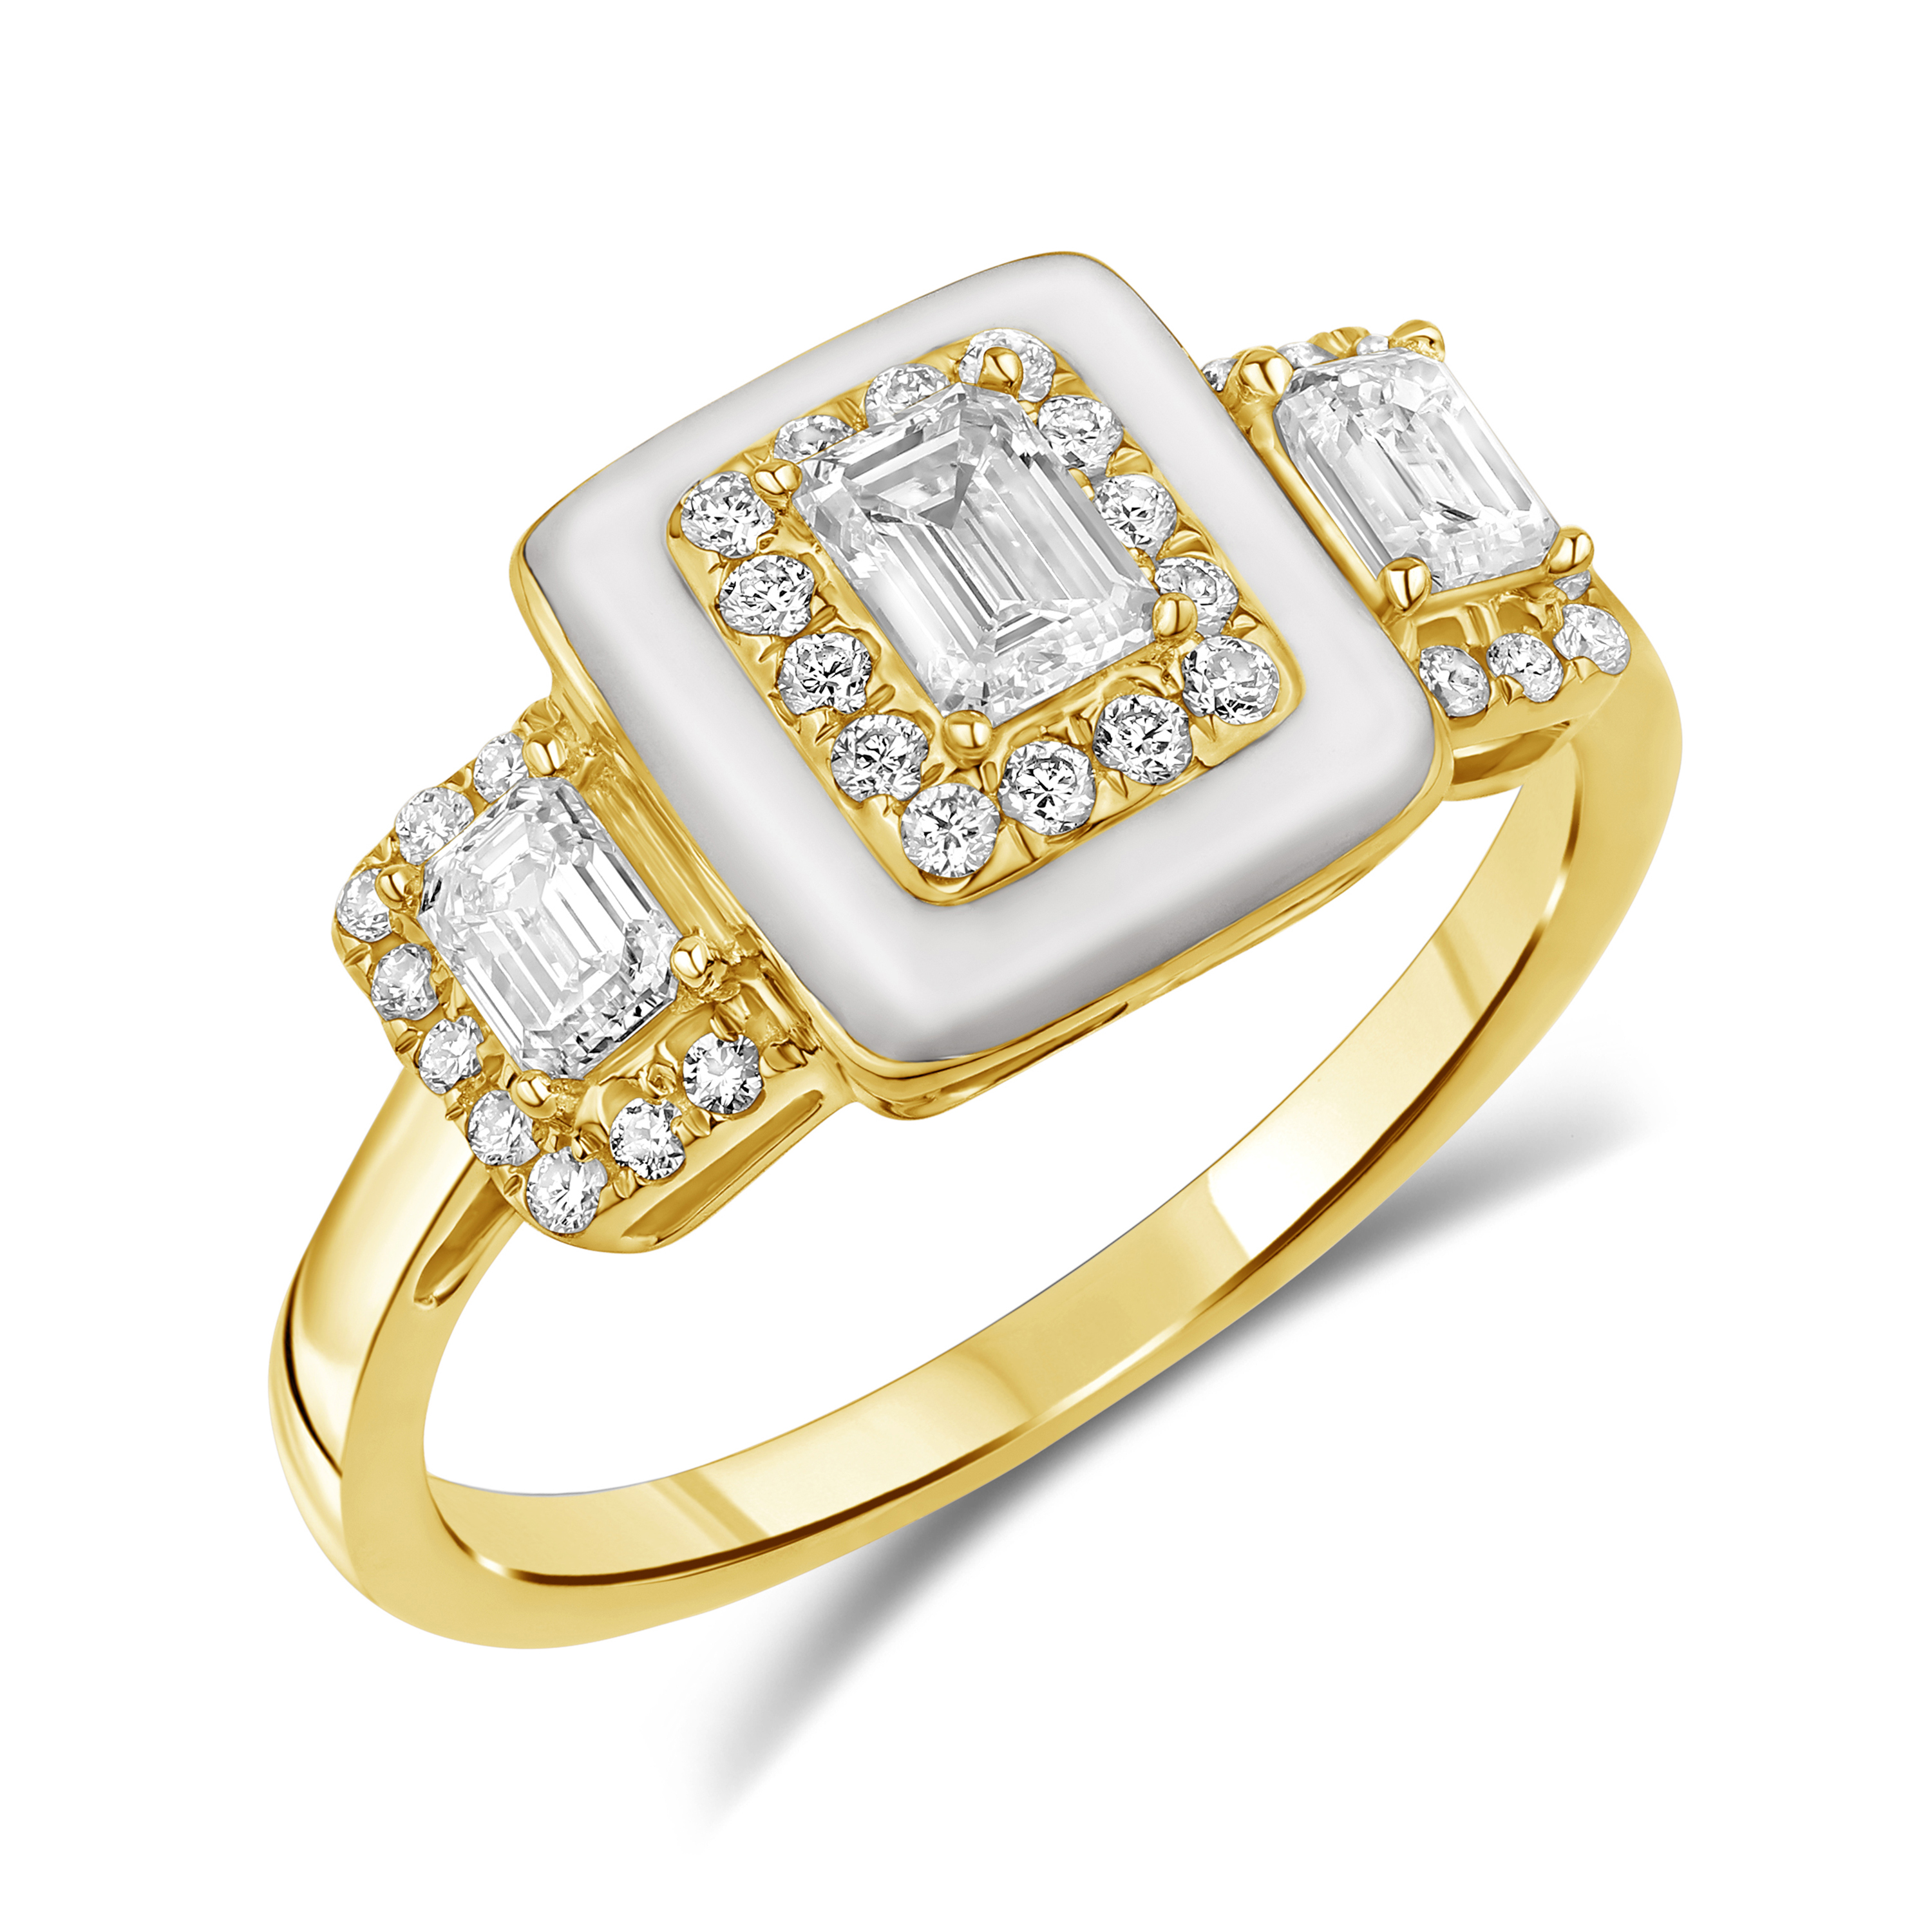 HE53173Q4YLG 14K yellow gold ring with emerald cut diamonds